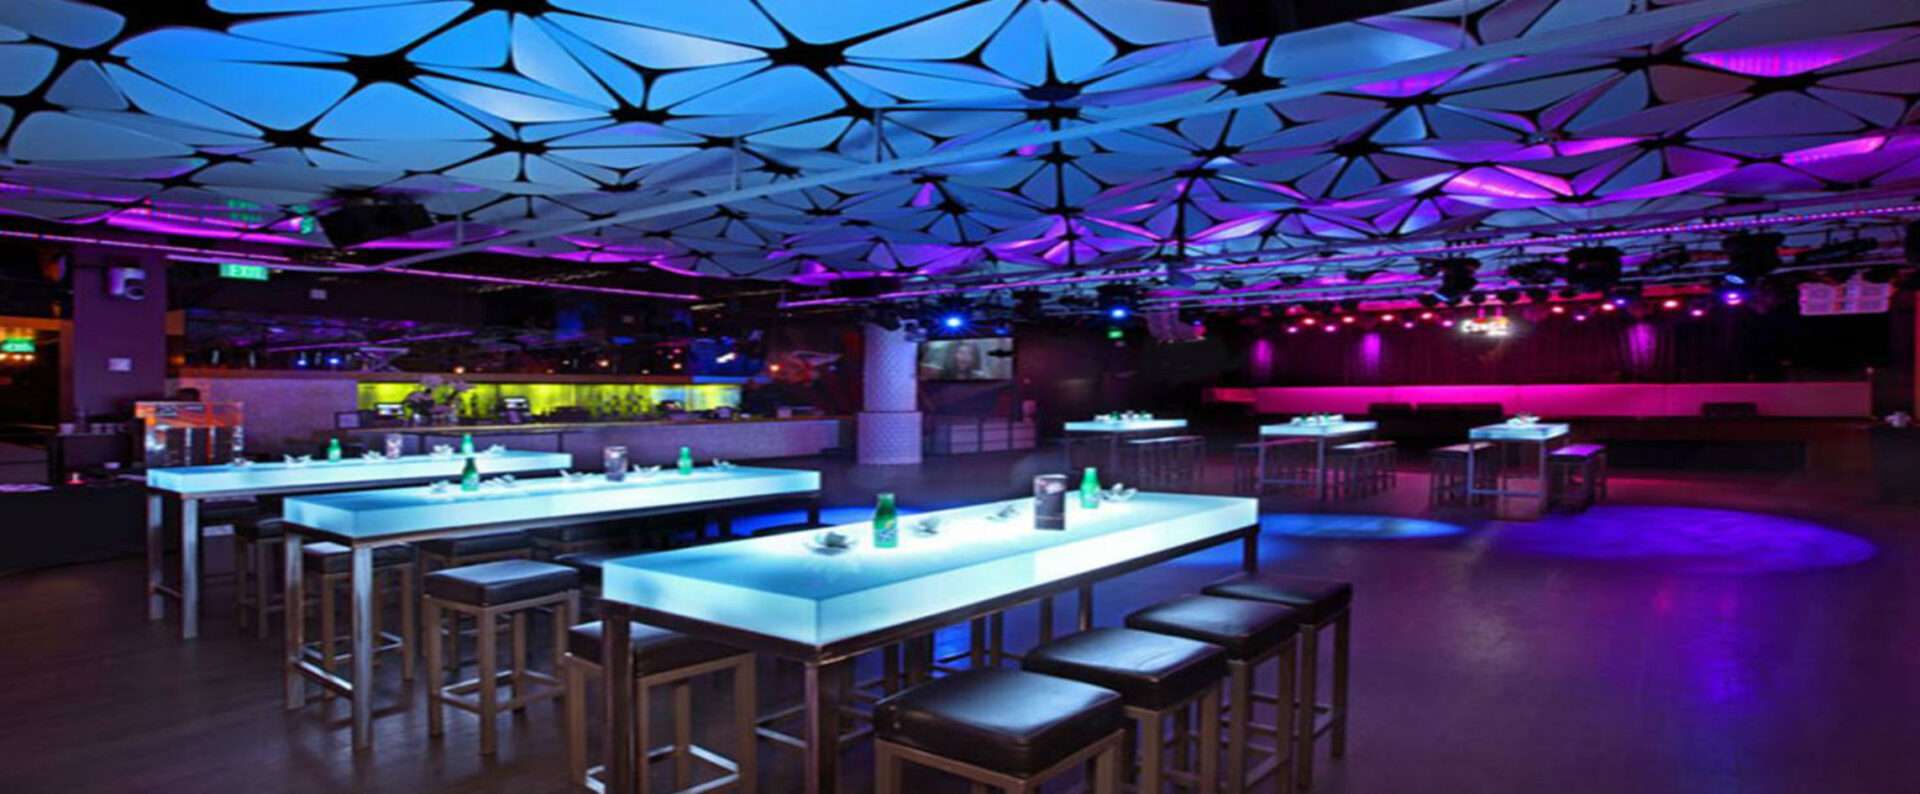 Night Clubs in Los Angeles - Bottle Service and VIP Table Booking